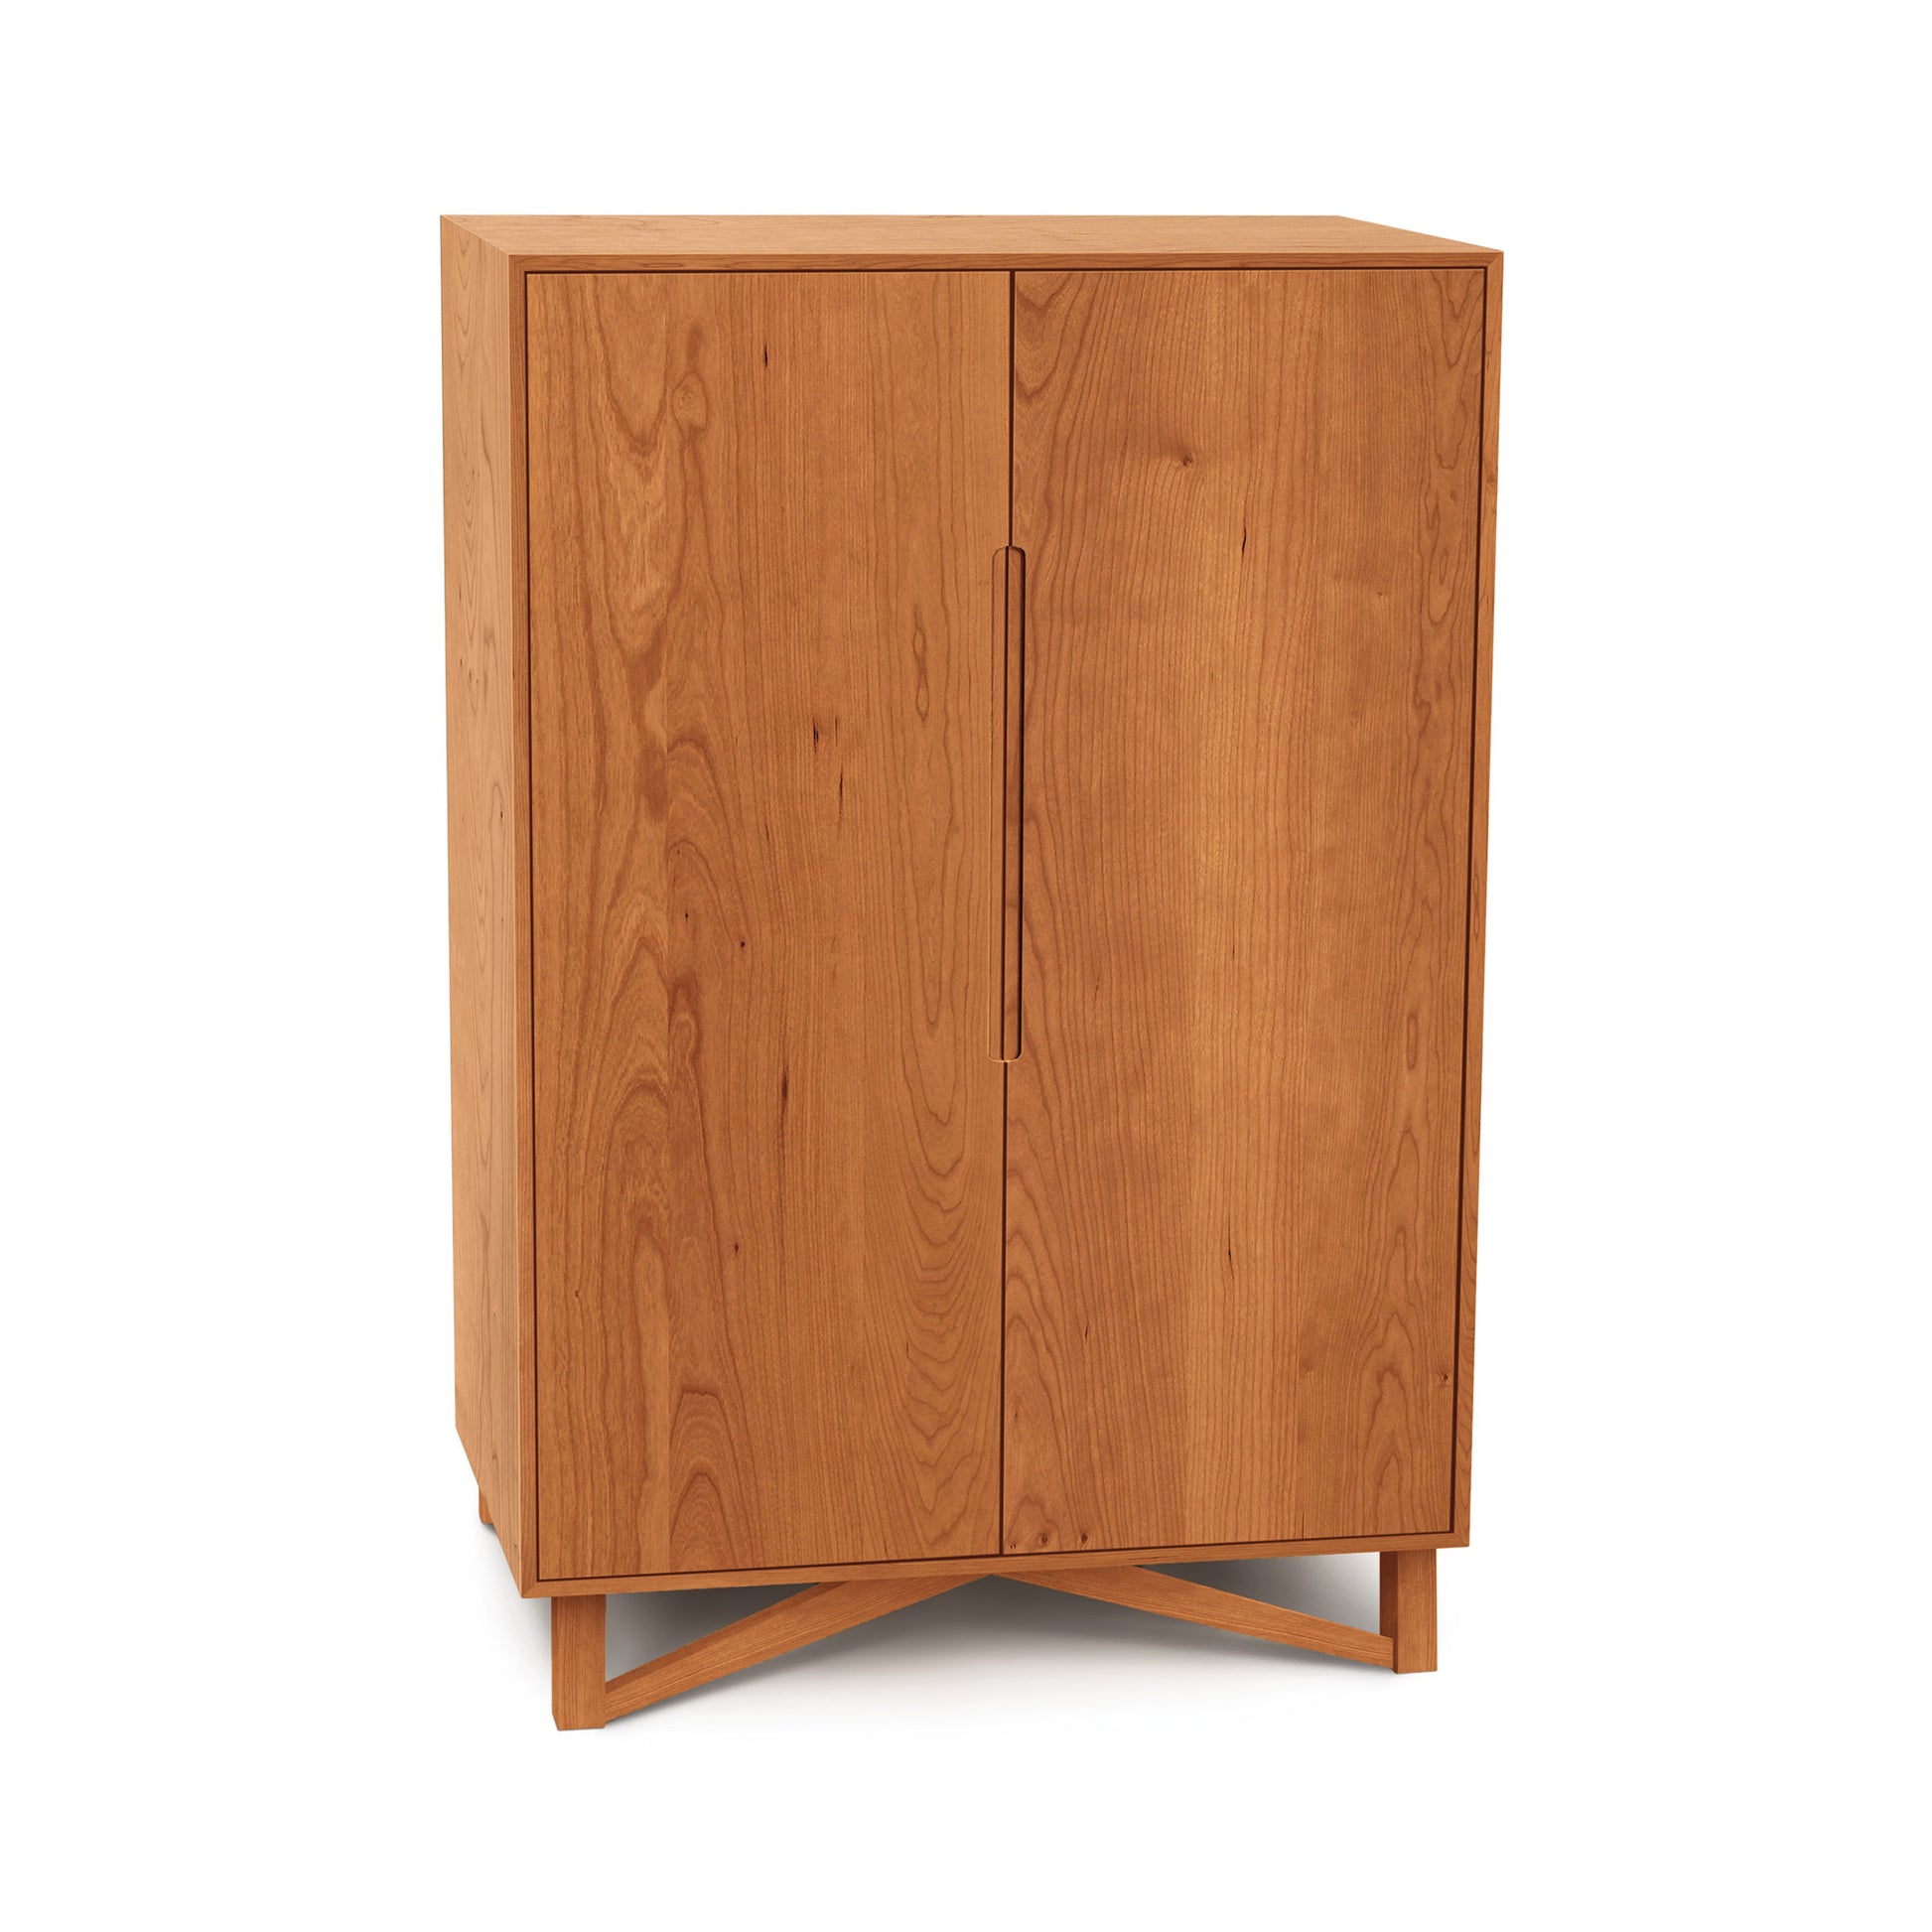 An Copeland Furniture Exeter Bar Cabinet, a mid-century modern design wooden cabinet with two doors on a white background.